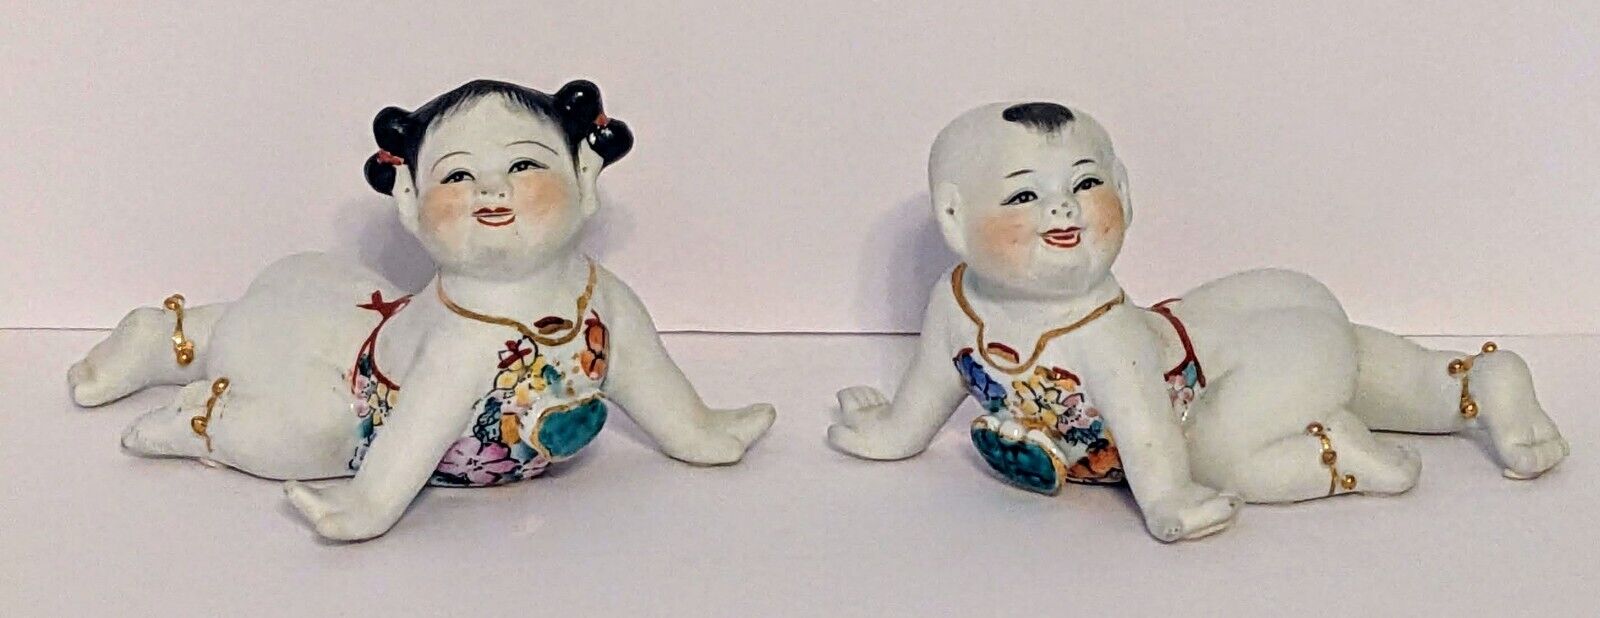 Vintage mid 20th century Chinese Famille Rose Piano Babies Figurines Boy/Girl